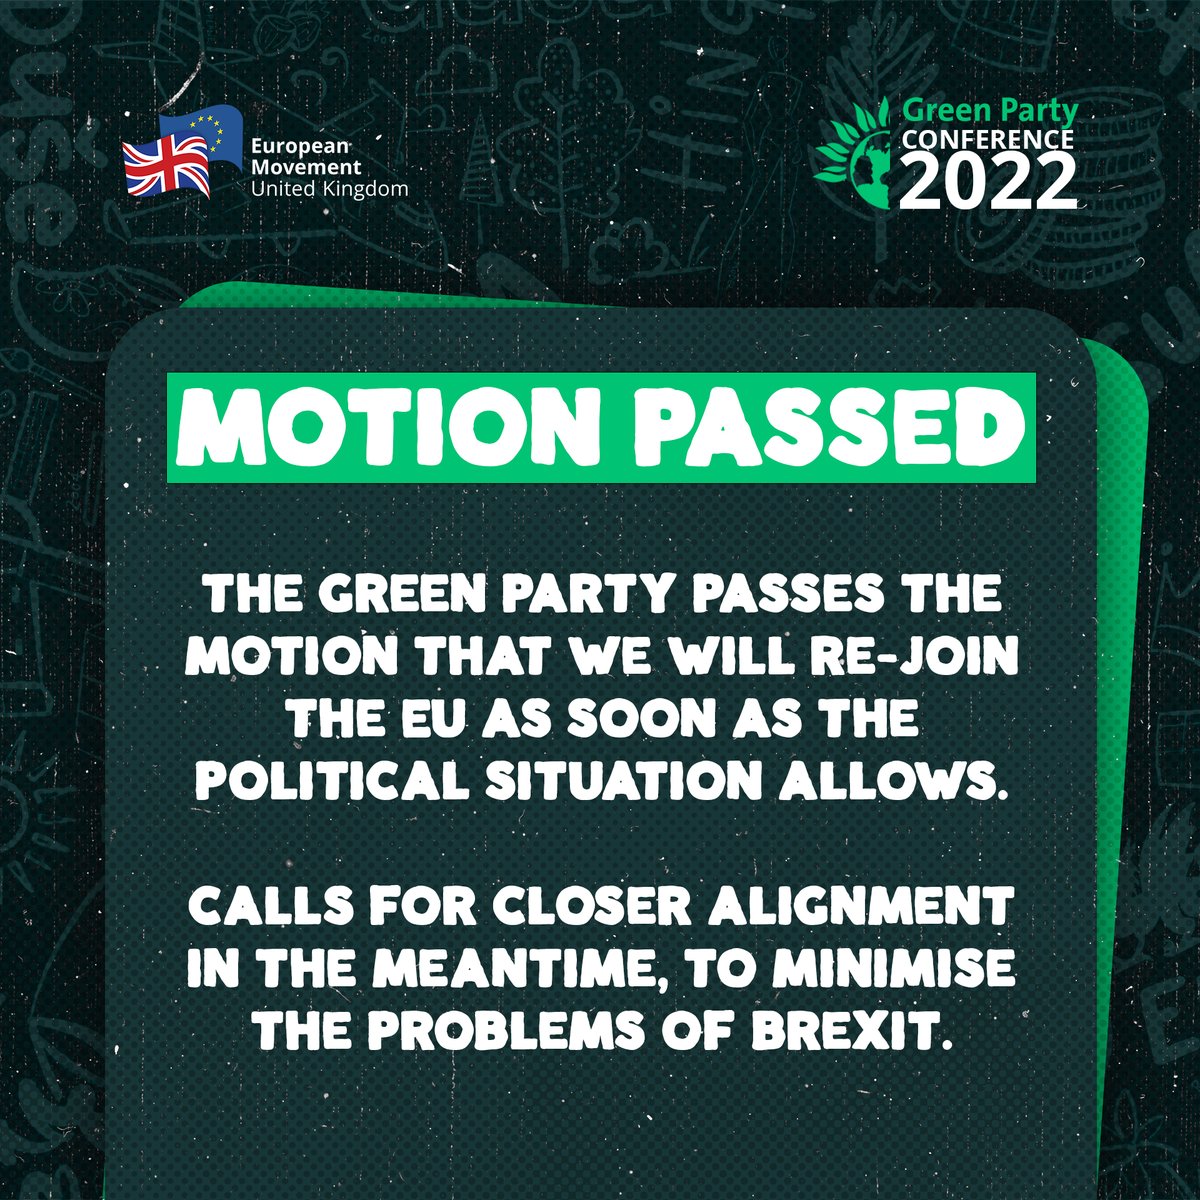 ✅ Motion passed!

@TheGreenParty passes the motion that we will Rejoin the EU as soon as the political situation allows. 

Calls for closer alignment in the meantime, to minimise the problems of Brexit.

#GPC22